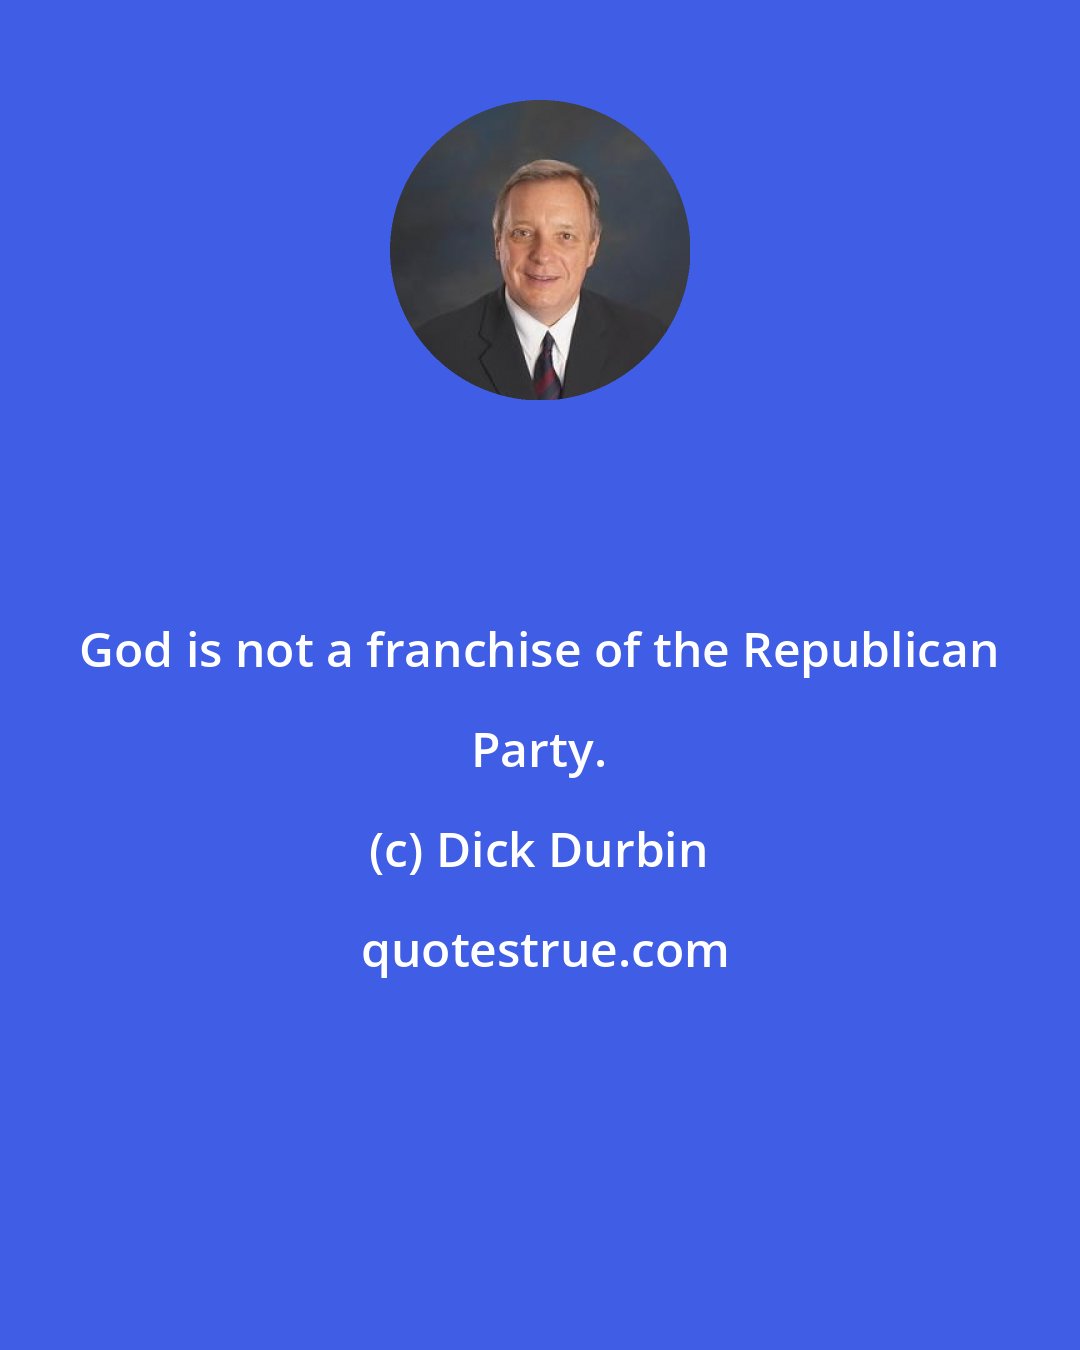 Dick Durbin: God is not a franchise of the Republican Party.